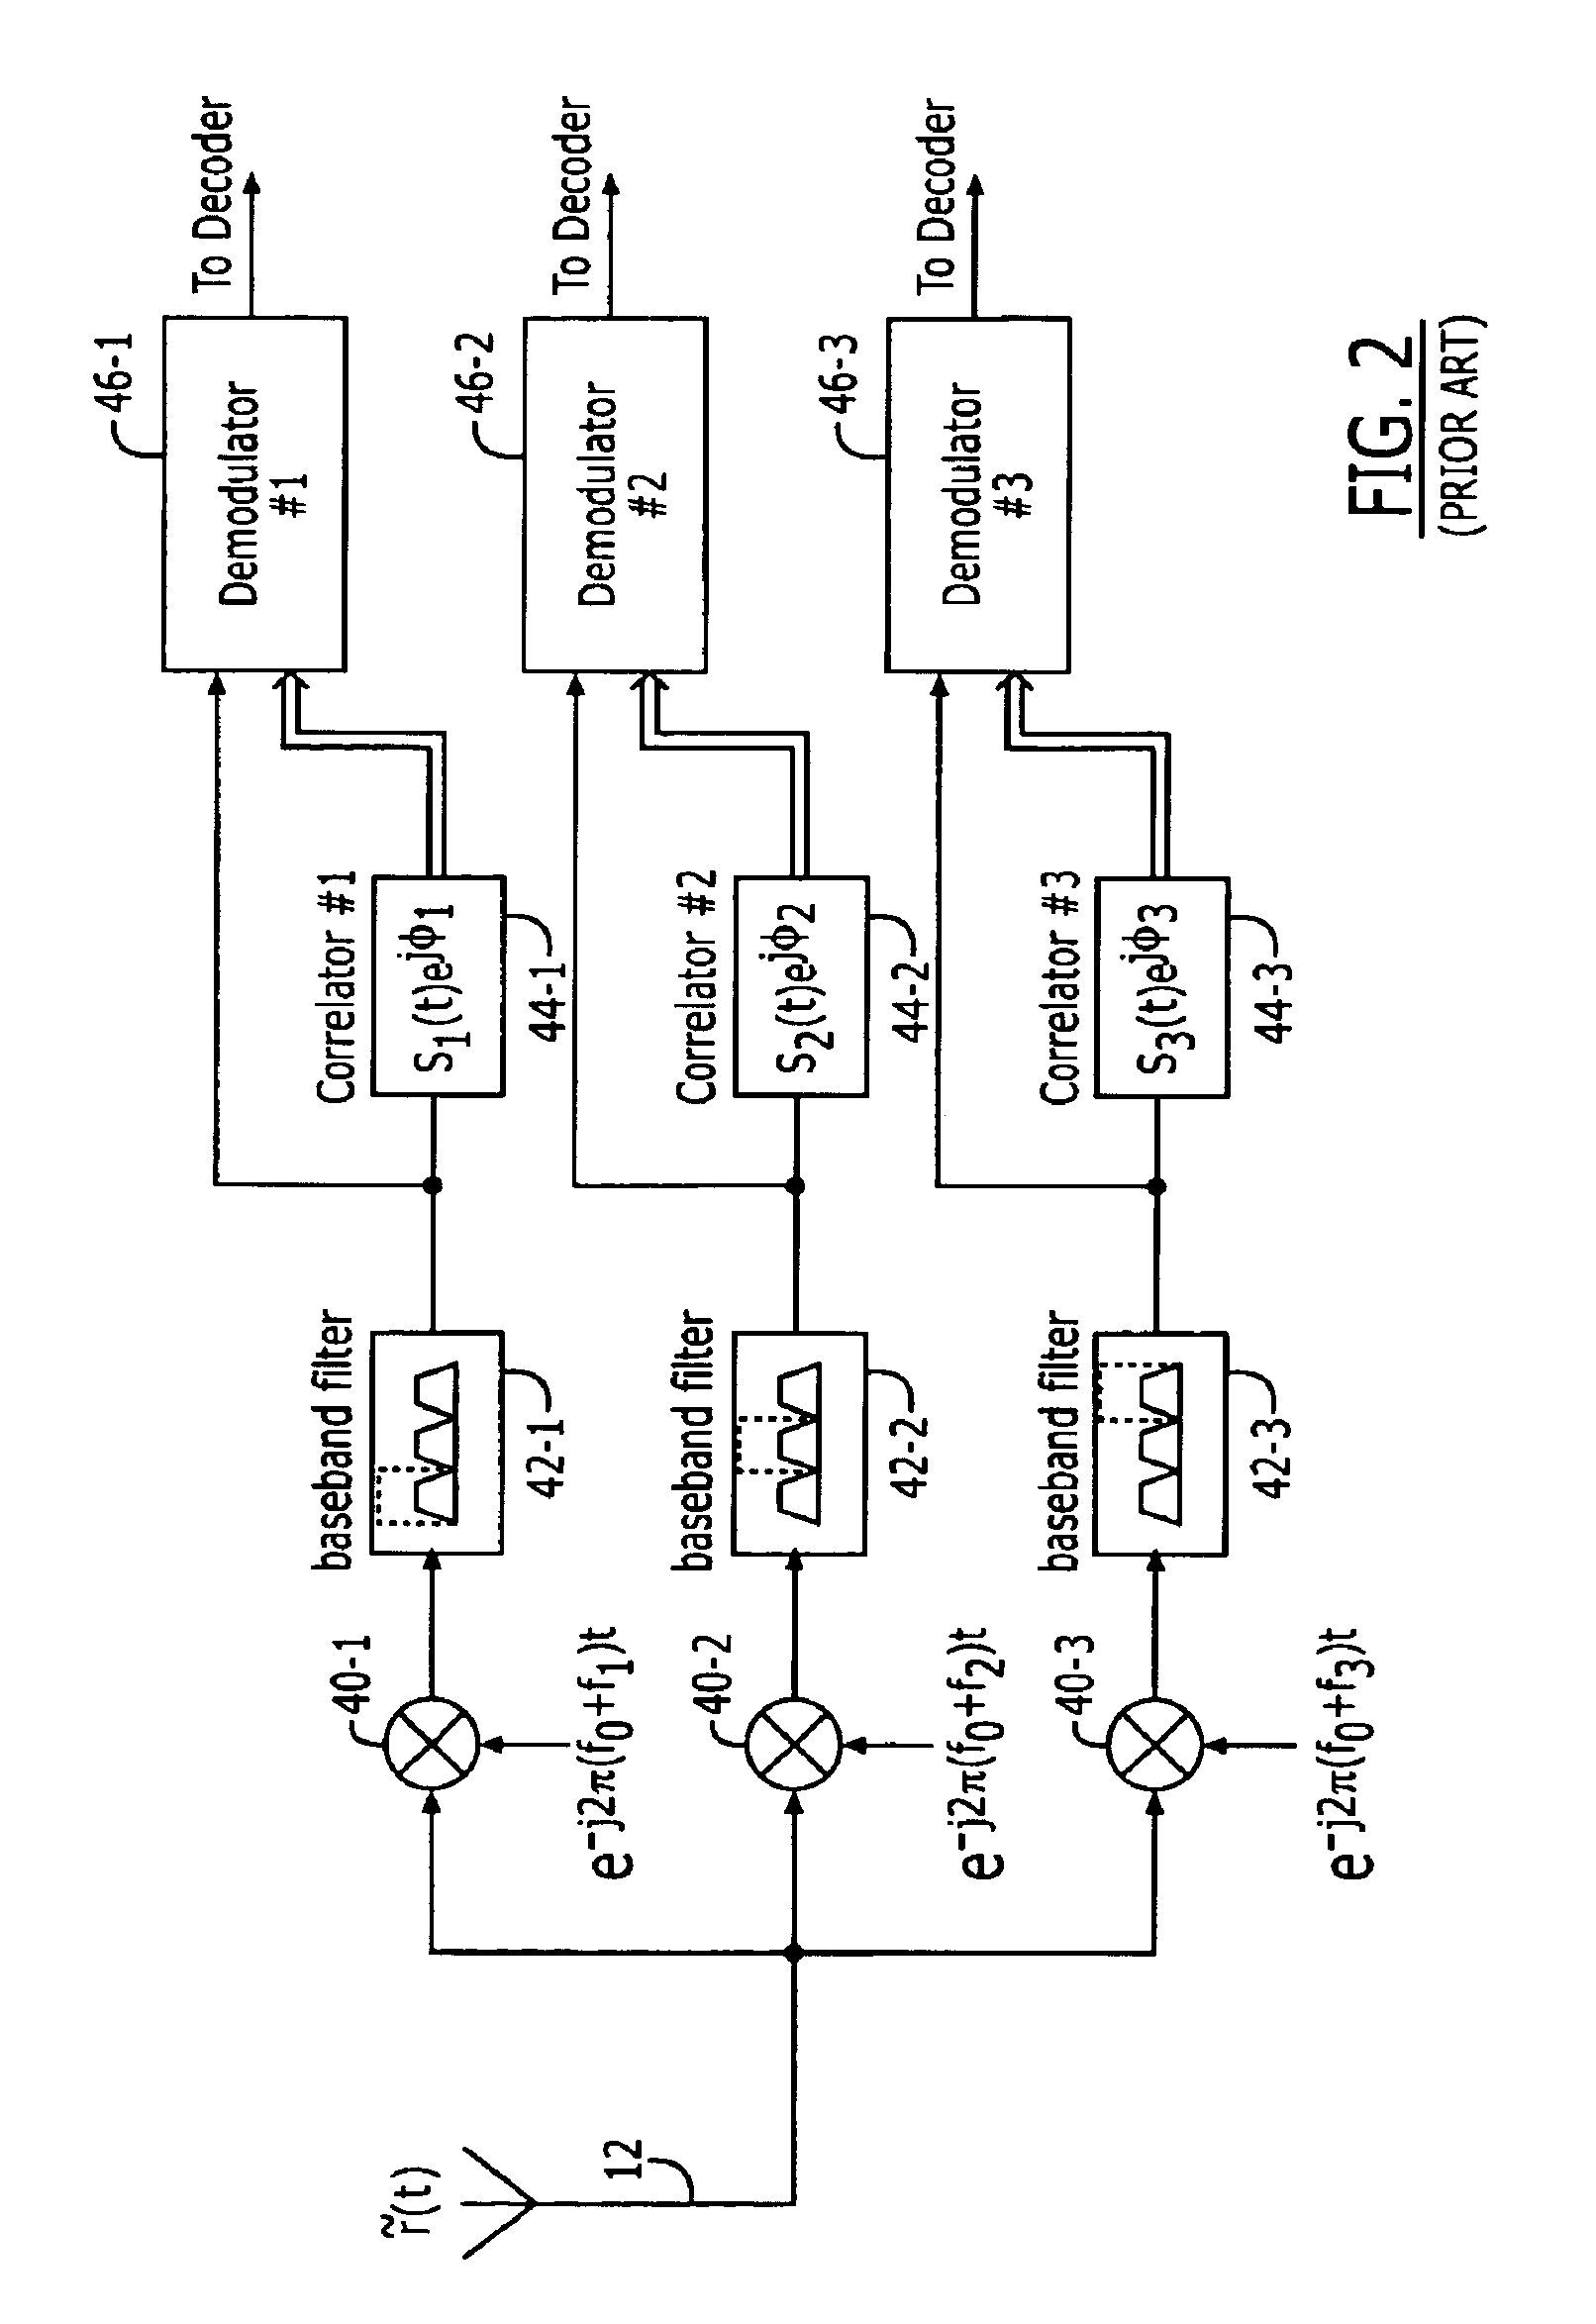 Delay and channel estimation for multi-carrier CDMA system